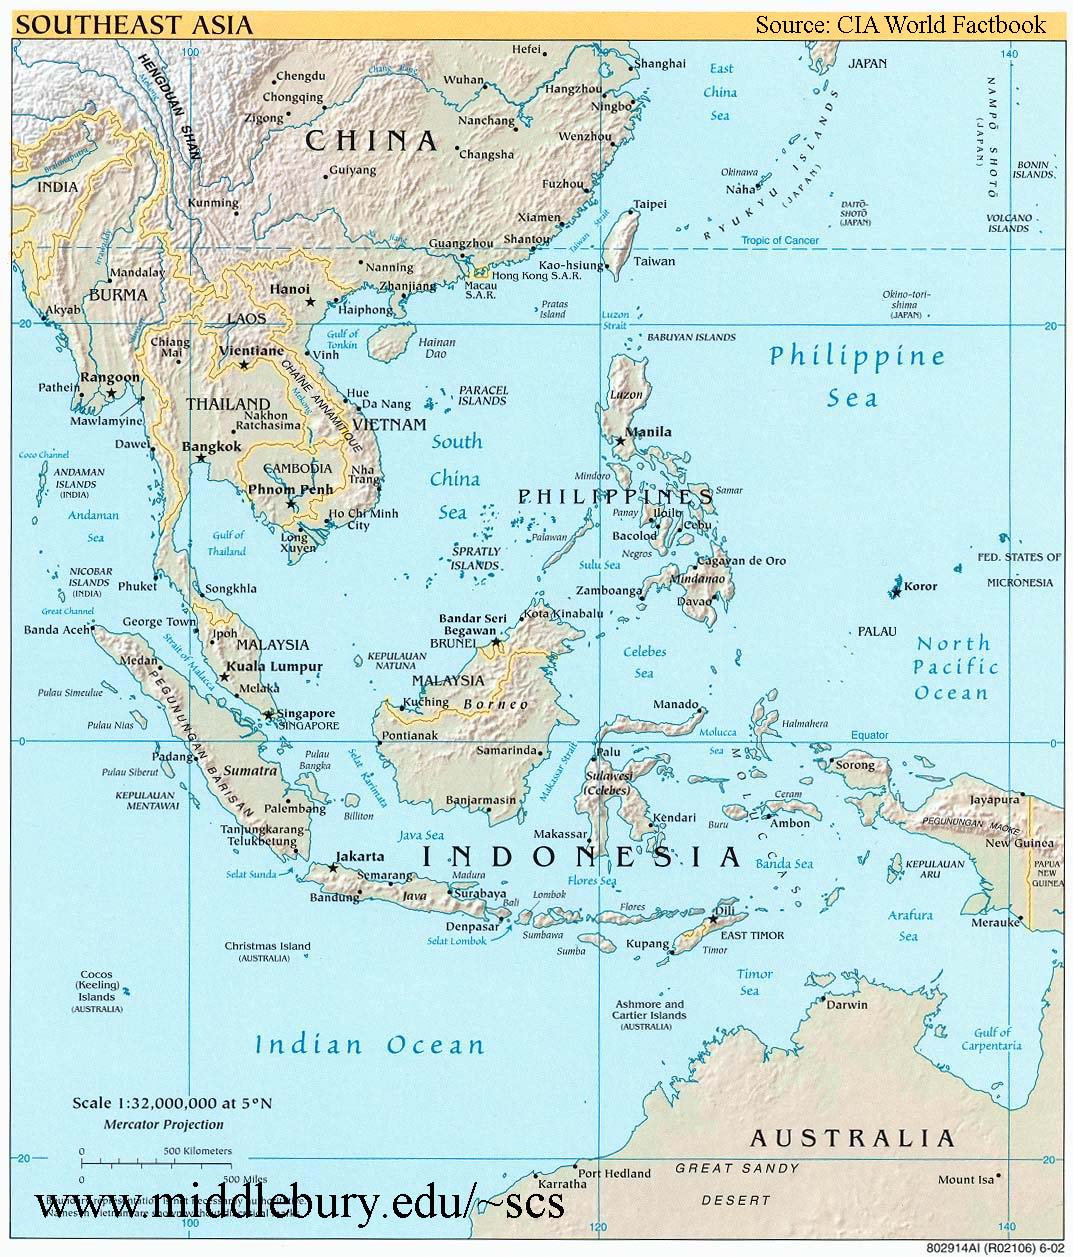 Southeast-Asia-Reference-Map-CIA-World-Factbook.jpg